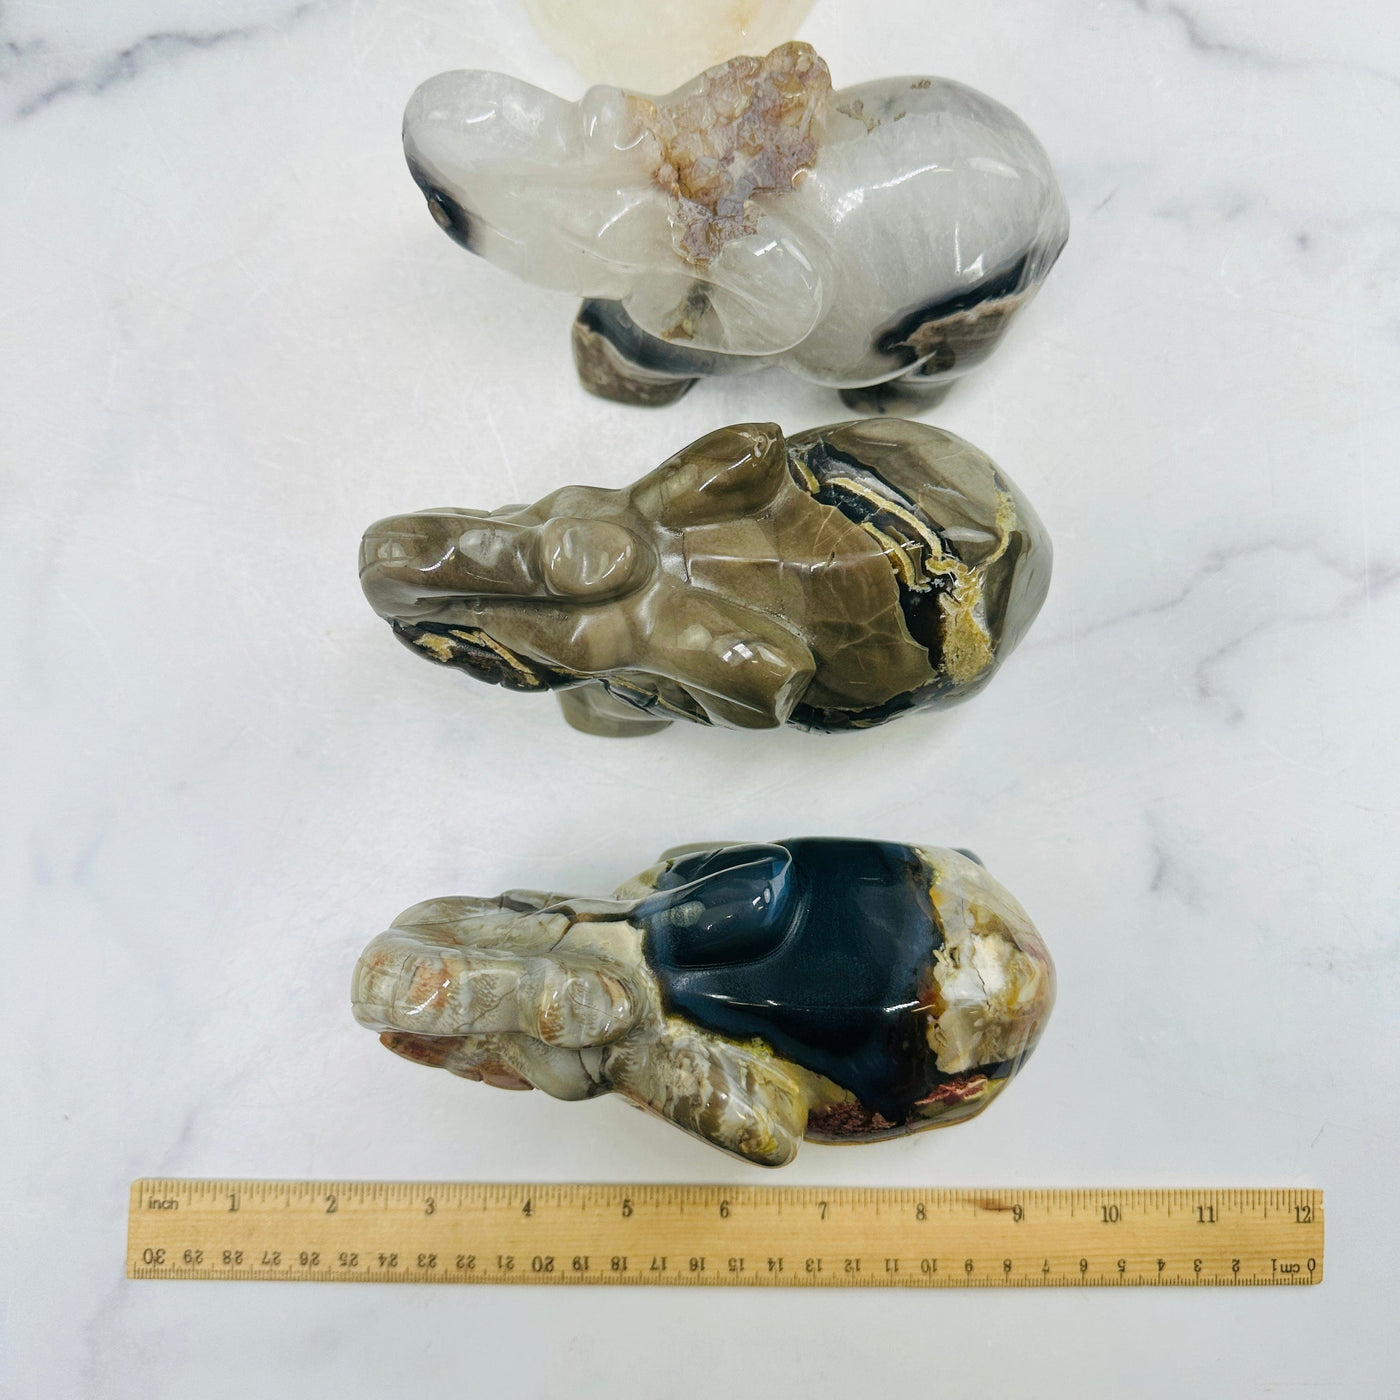 Lava Agate Crystal Carved Elephants - YOU CHOOSE all elephants top view with ruler measuring length for size reference